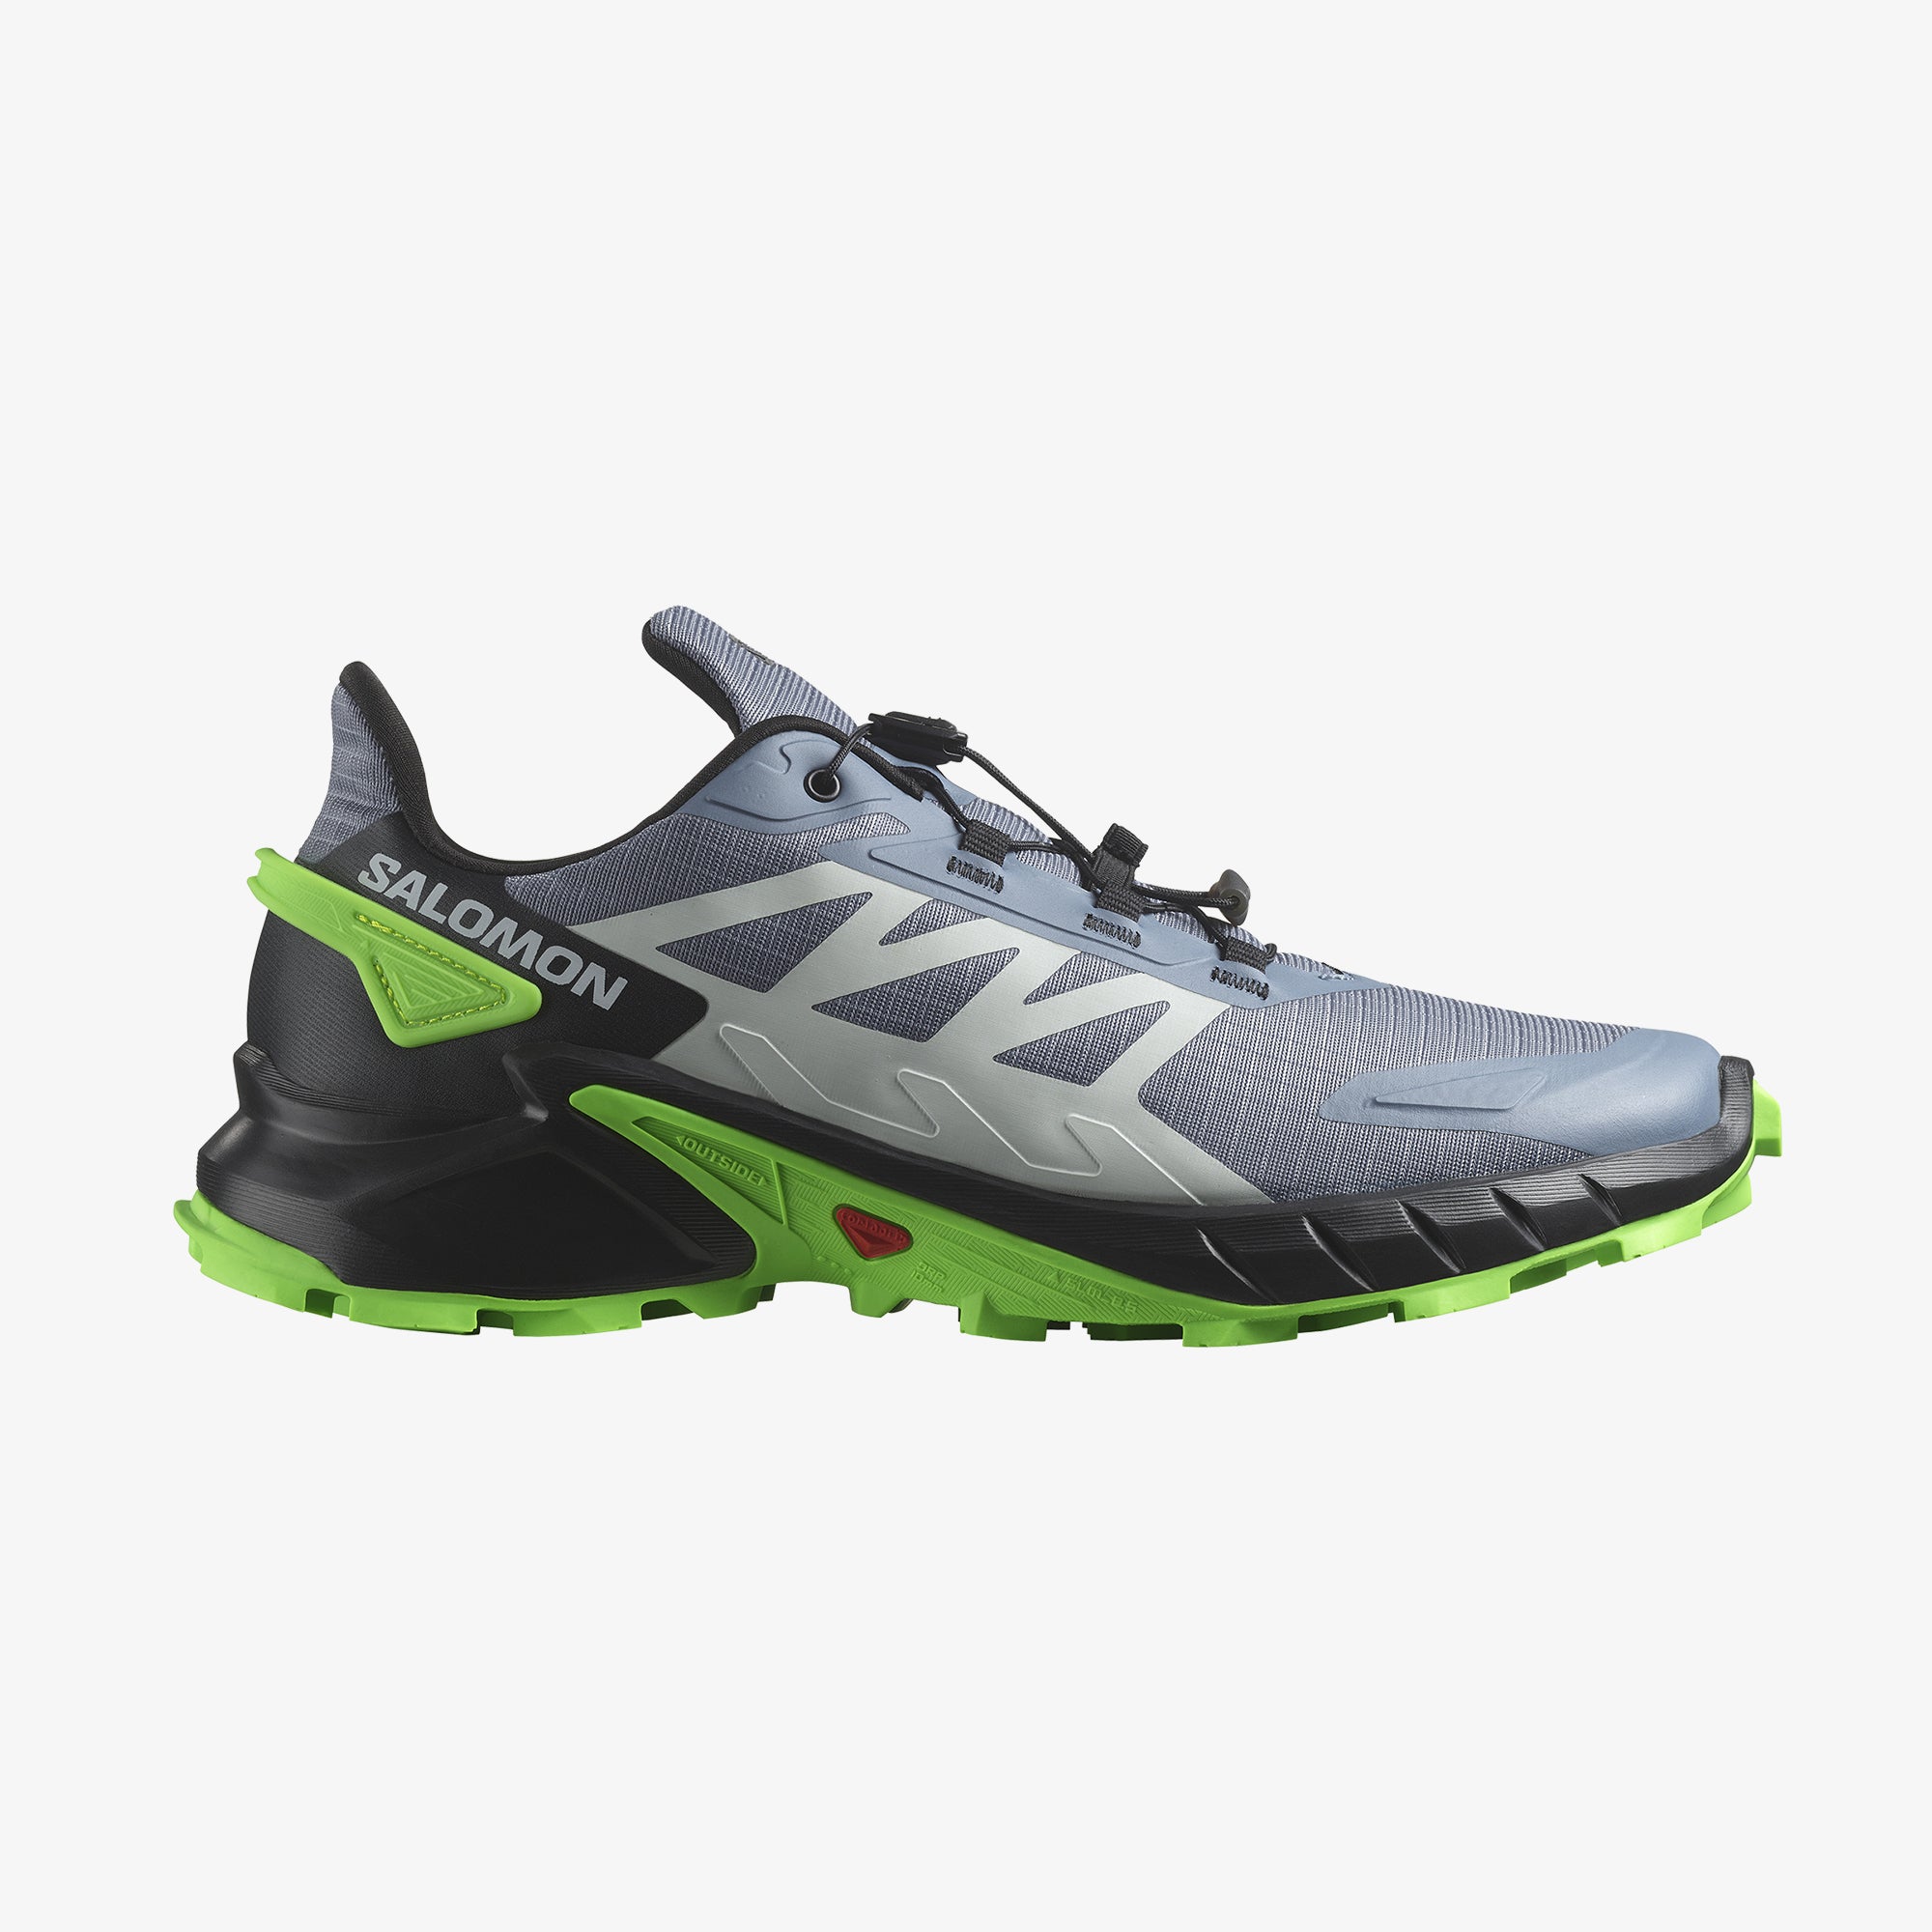 MEN'S TRAIL RUNNING SHOES